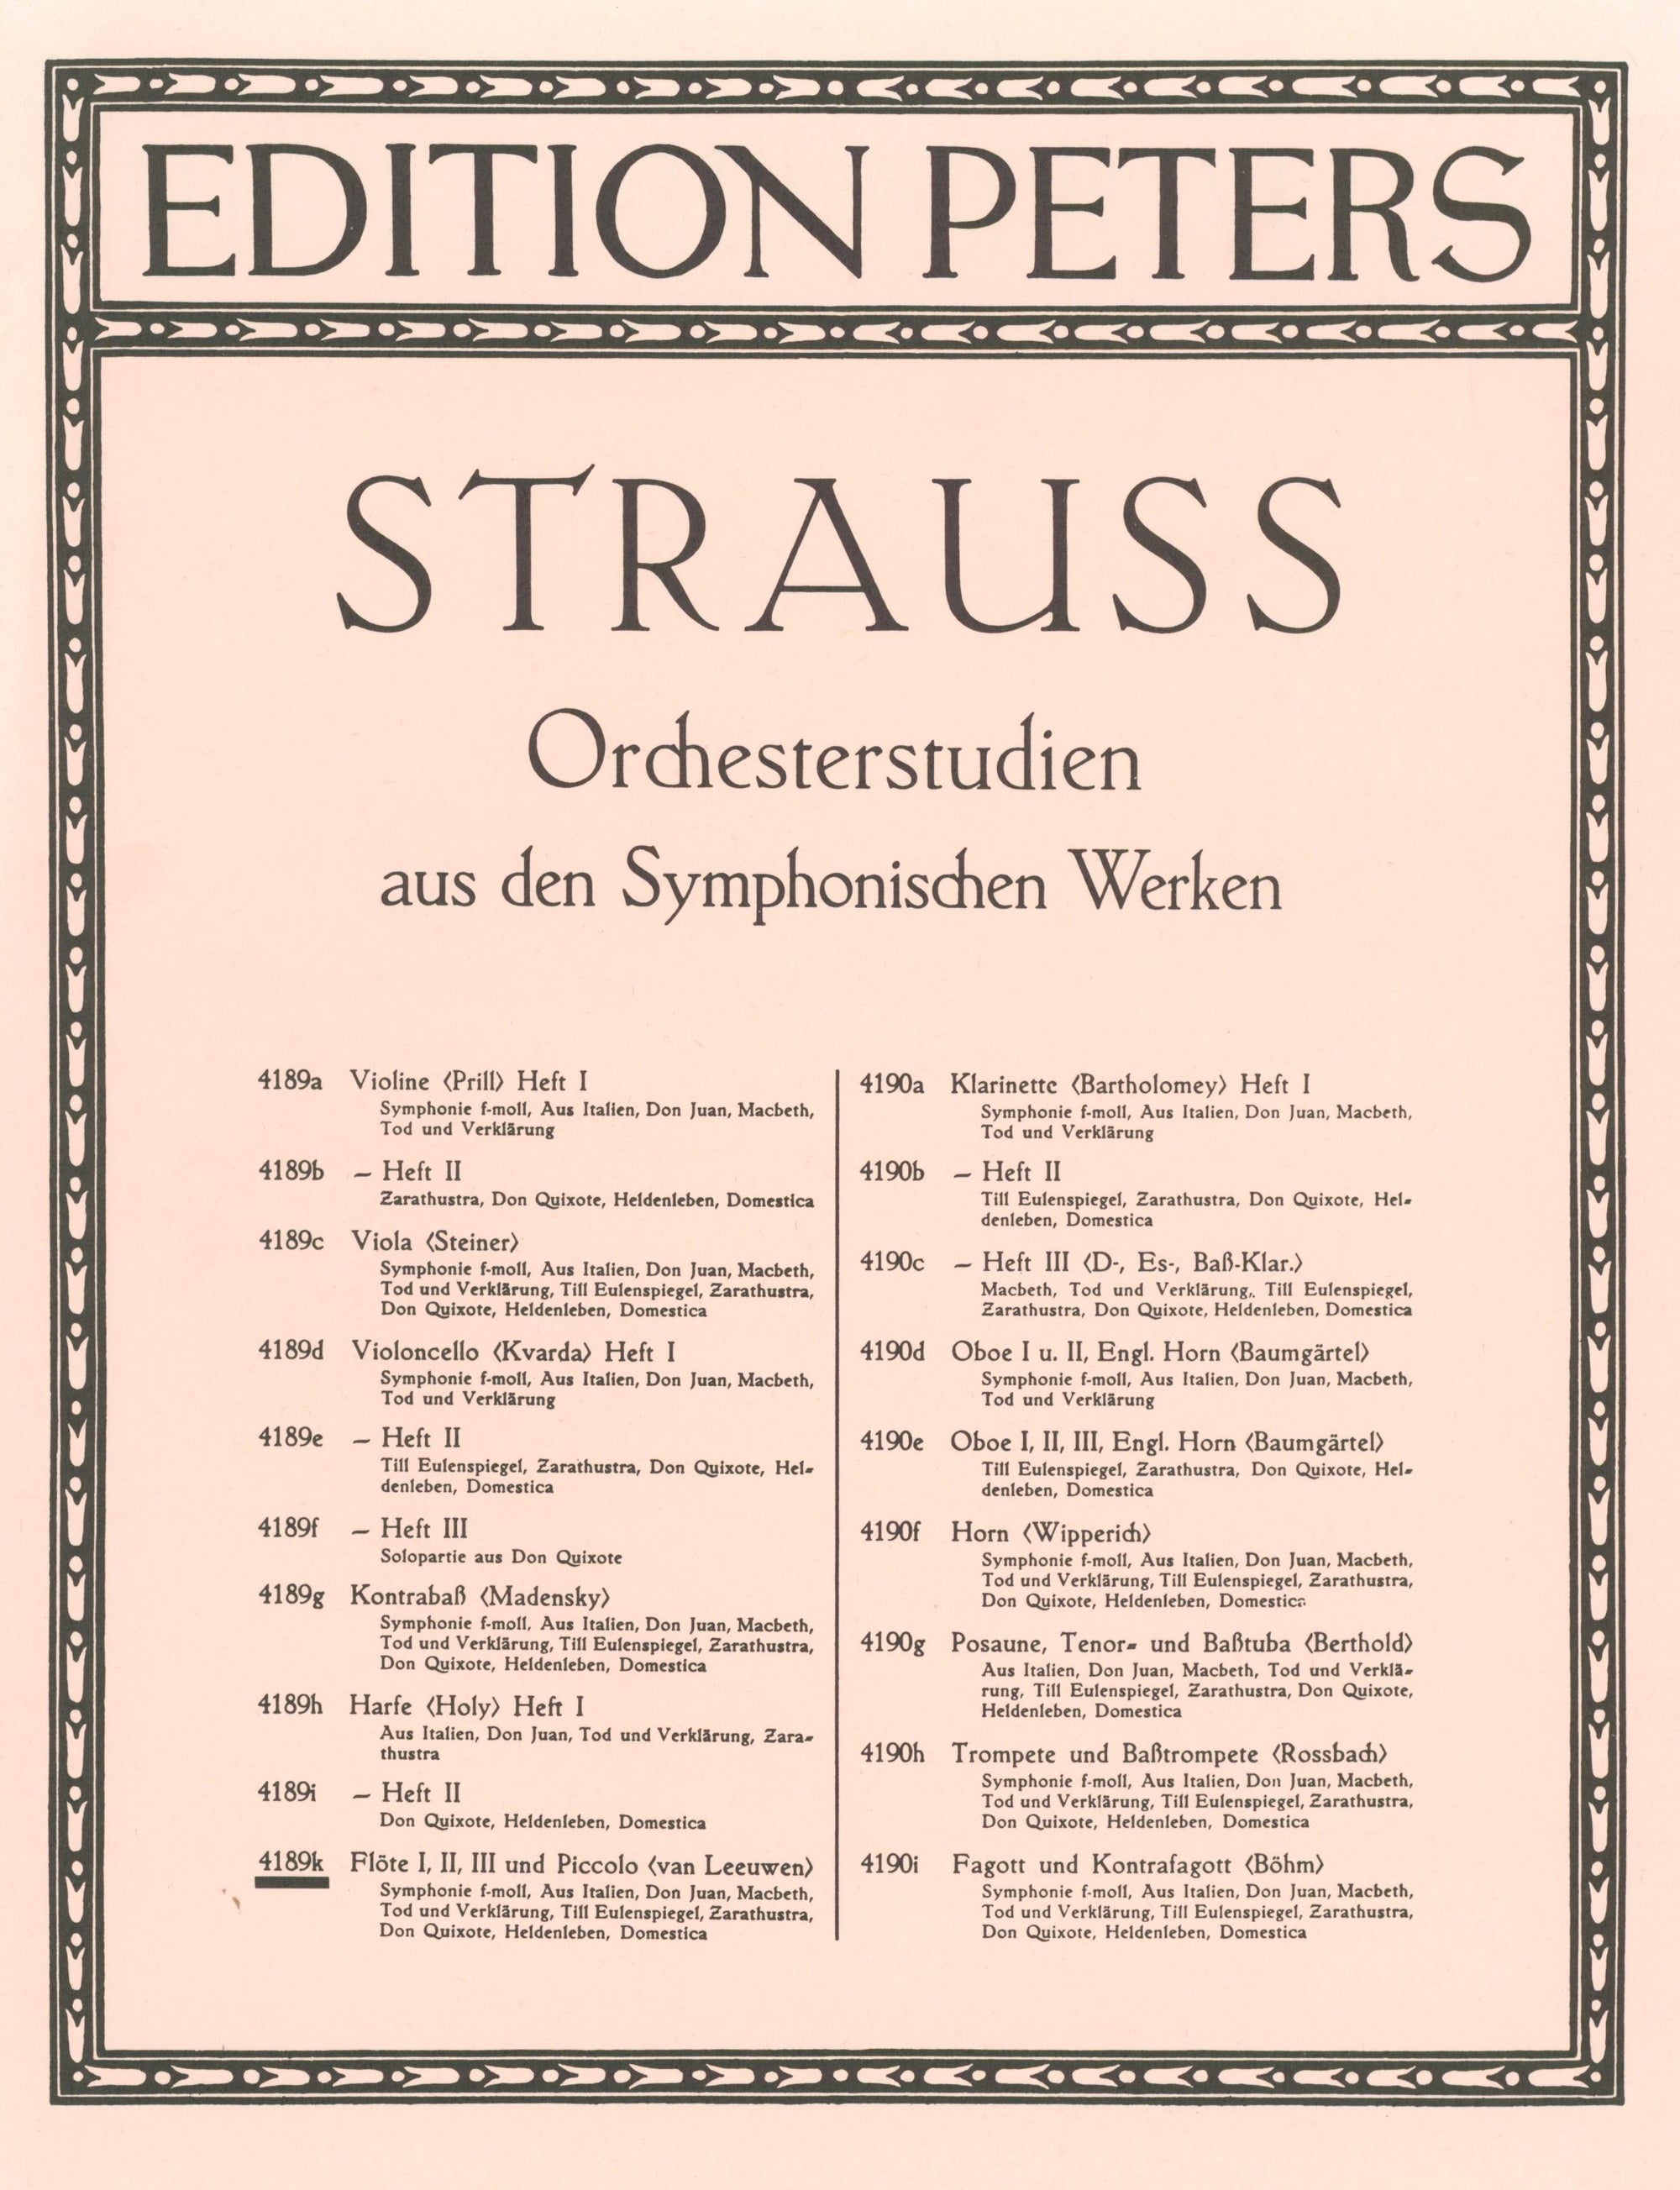 Strauss: Orchestral Excerpts from Symphonic Works for Flute